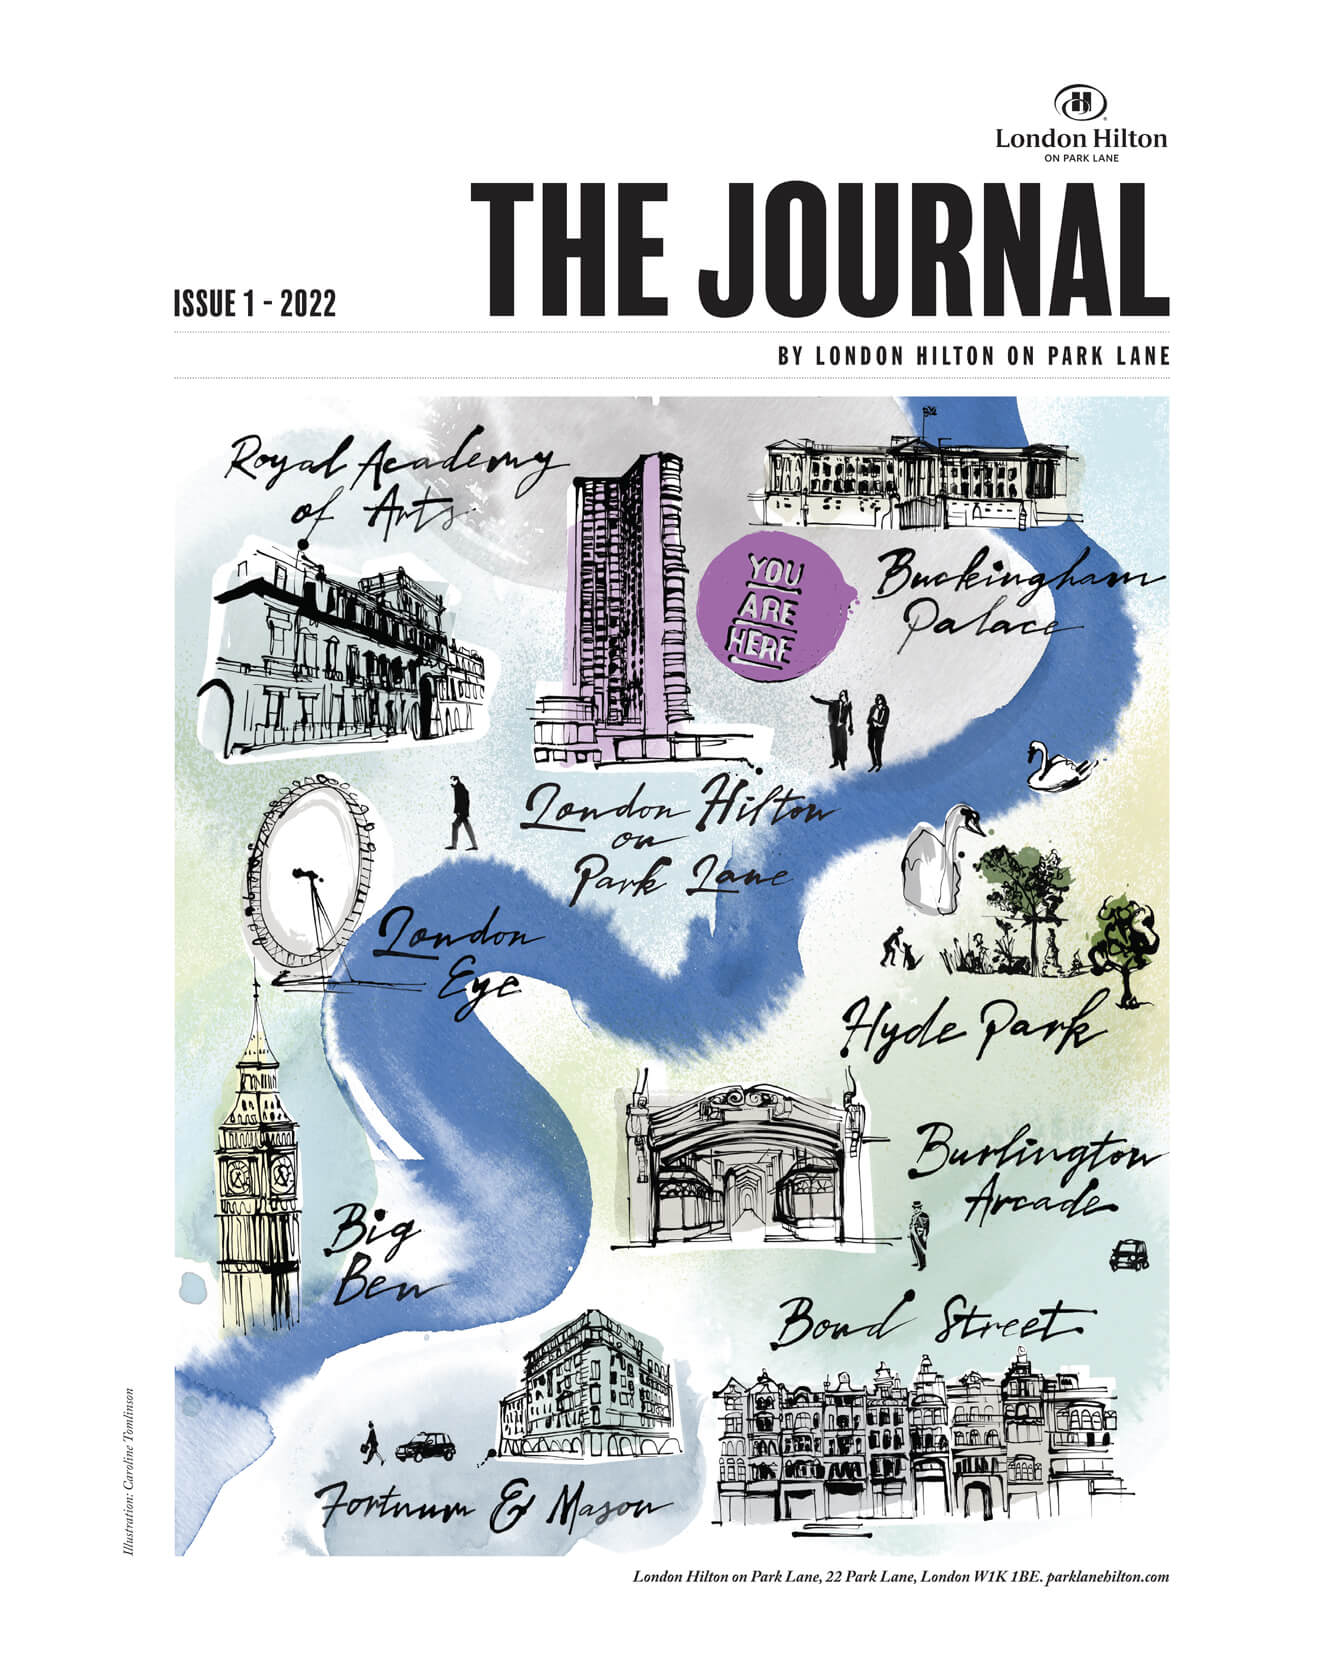 Architecture - Hilton Hotel Park Lane London Illustrated Cover for 'The Journal'